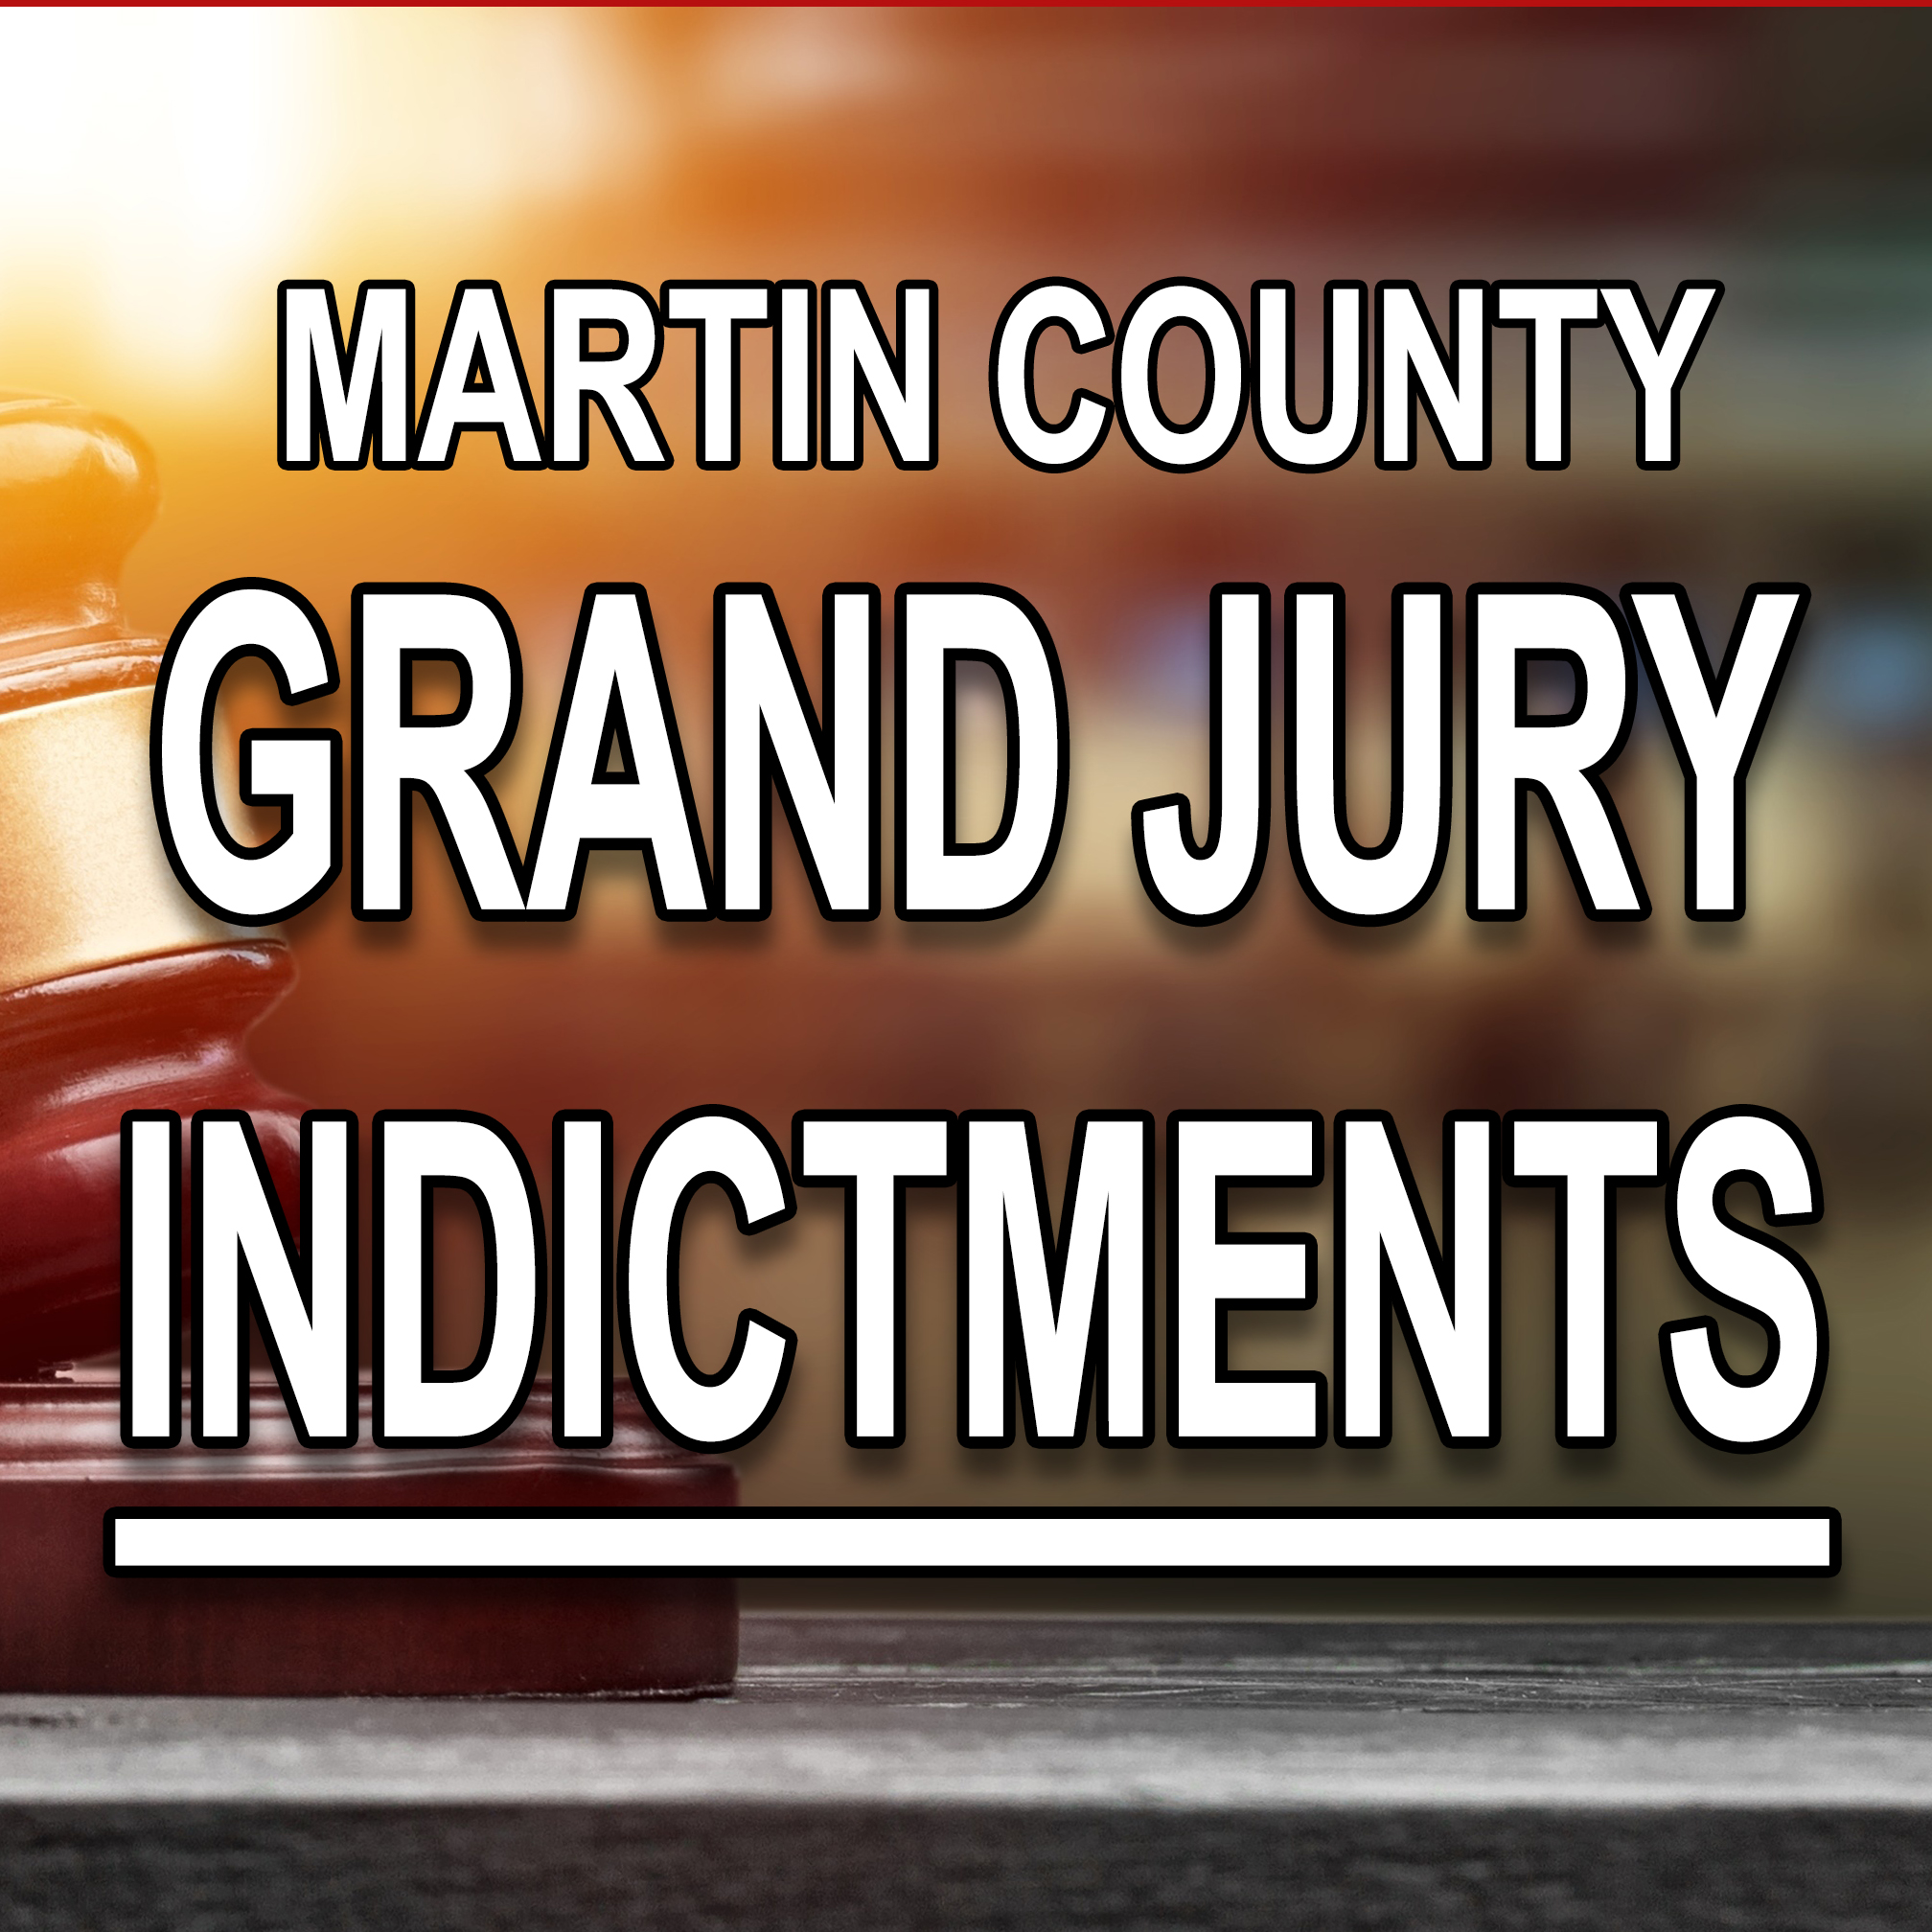 Martin County indictments include manslaughter, kidnapping, copper theft